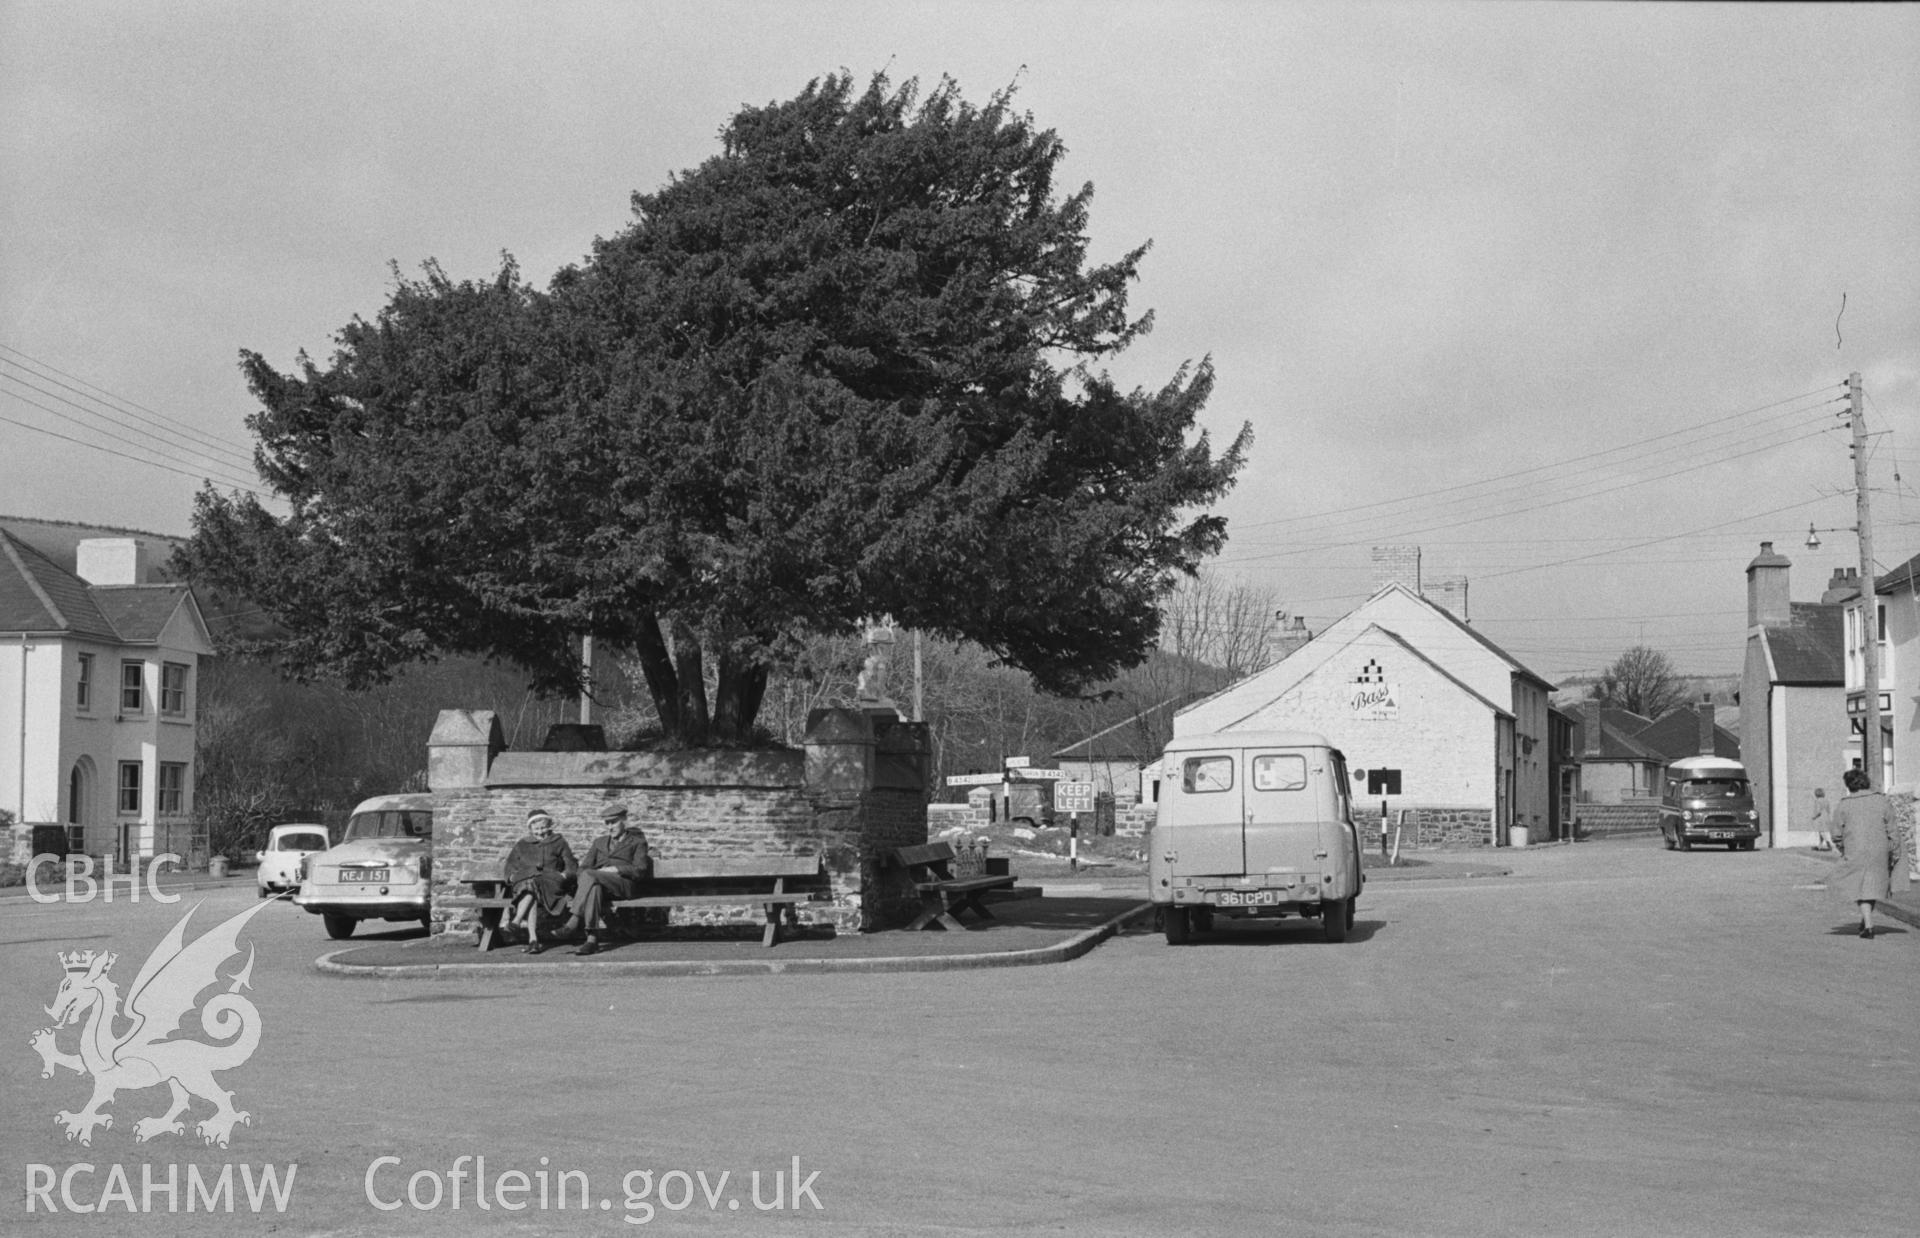 Black and White photograph showing the main square with yew tree at Llangeitho village. Photographed by Arthur Chater in April 1963 from Grid Reference SN 619 597, looking north east.